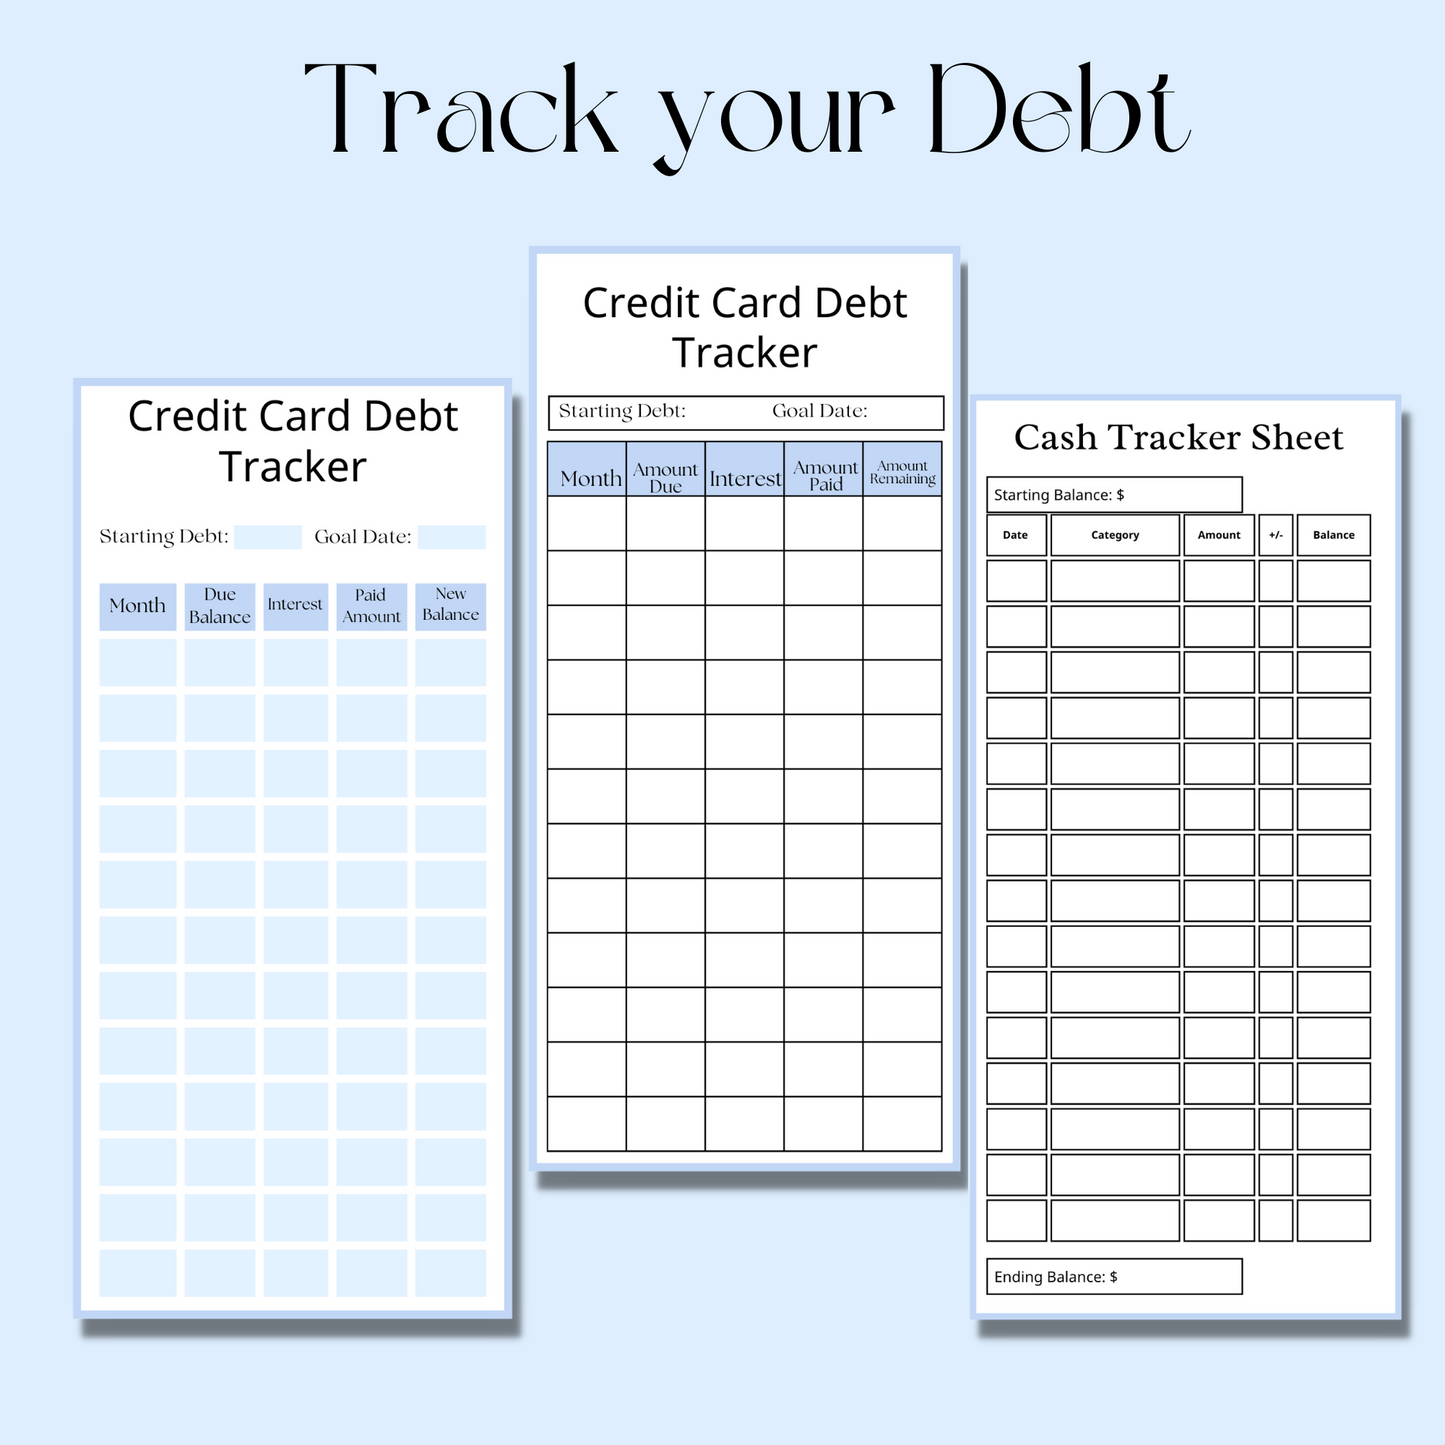 Digital Credit Card Tracker for Debt Payoff (DOWNLOAD)